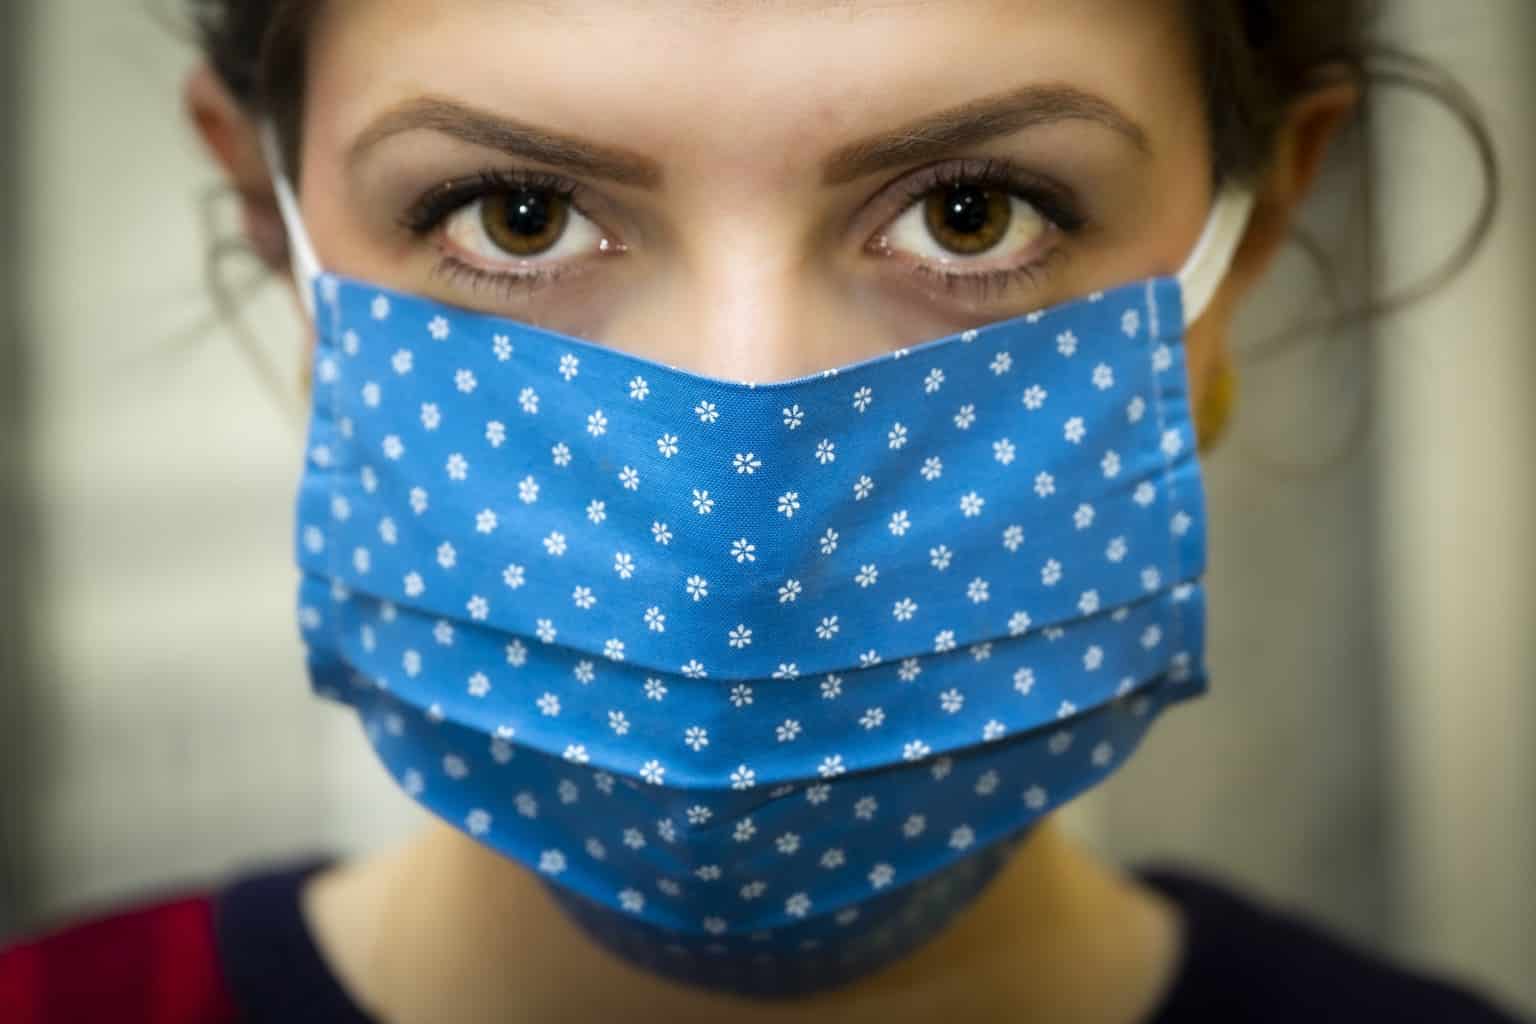 Women have been adversely affected by the pandemic. | Image by Christo Anestev from Pixabay